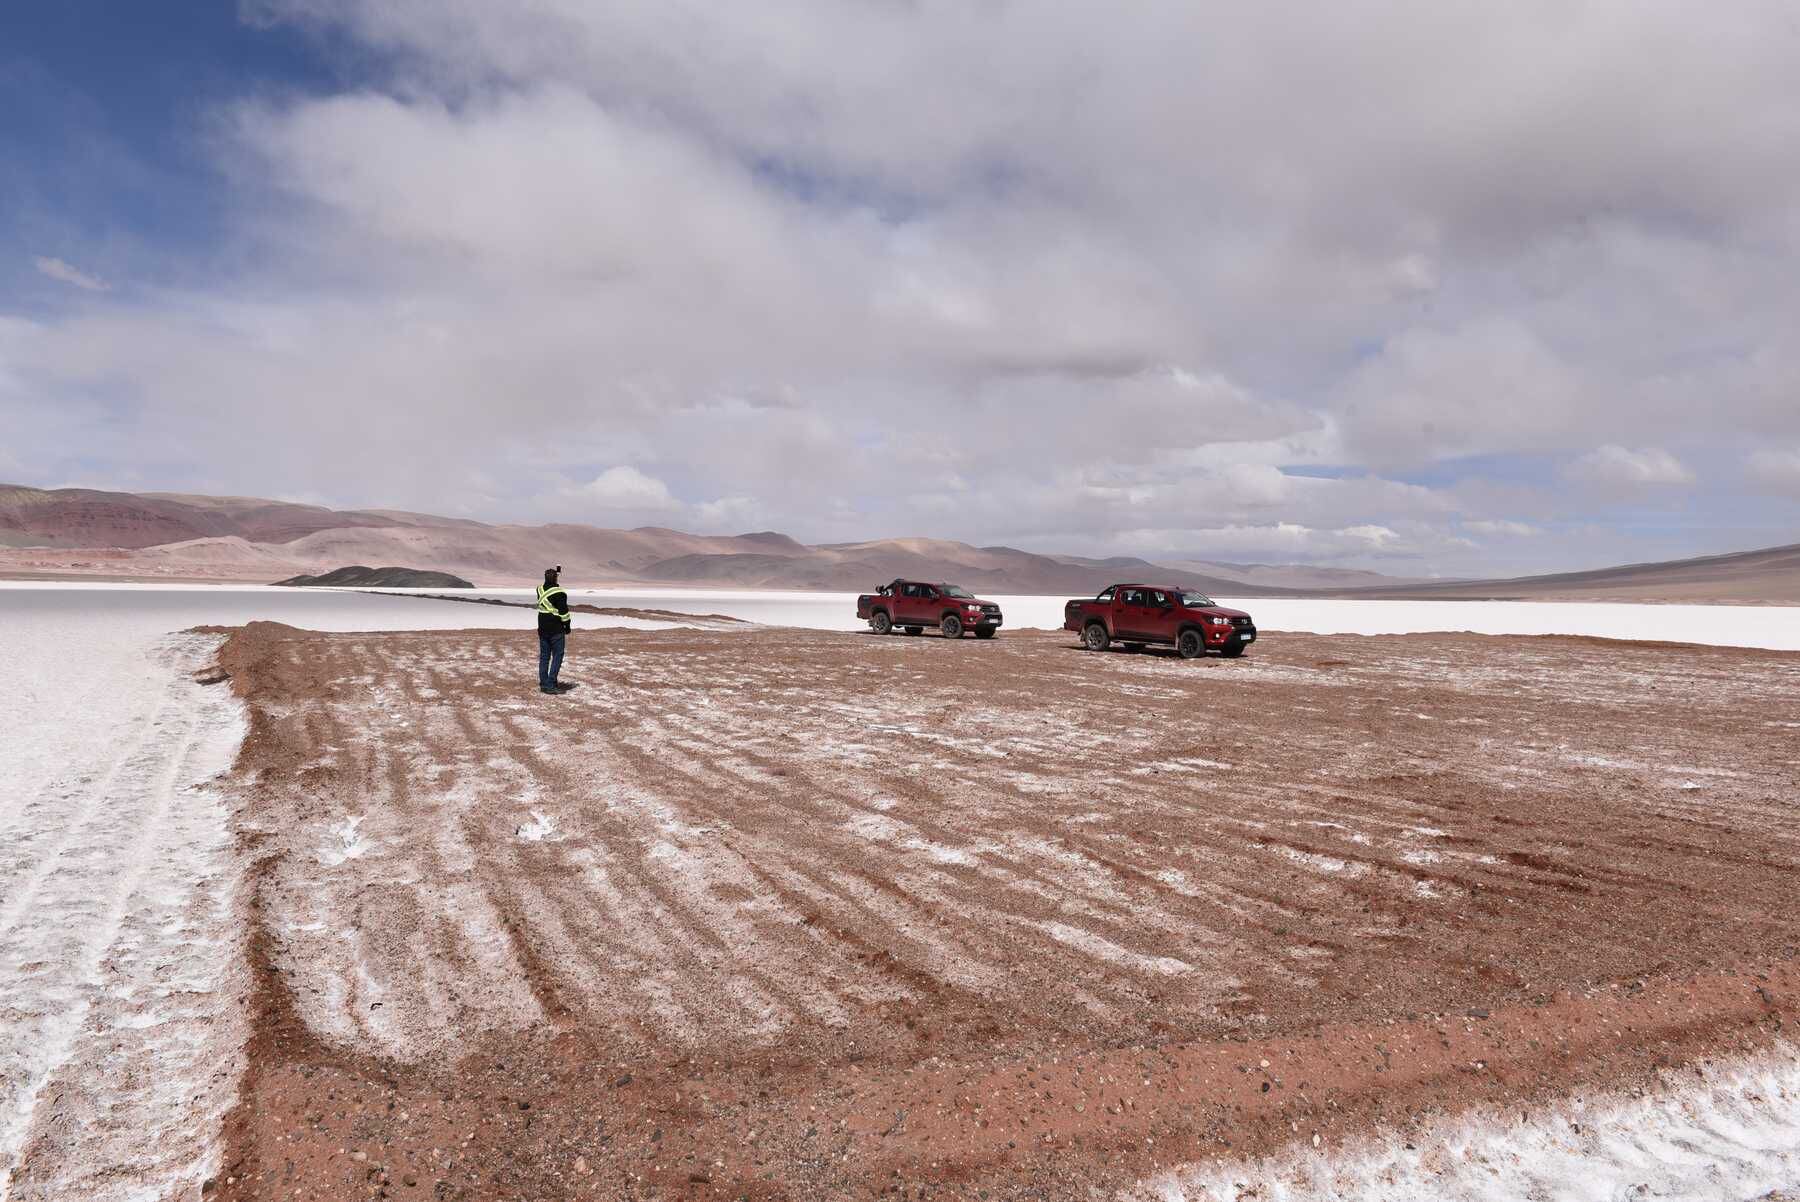 Australian Galan Lithium gets permission to develop lithium project in Argentina